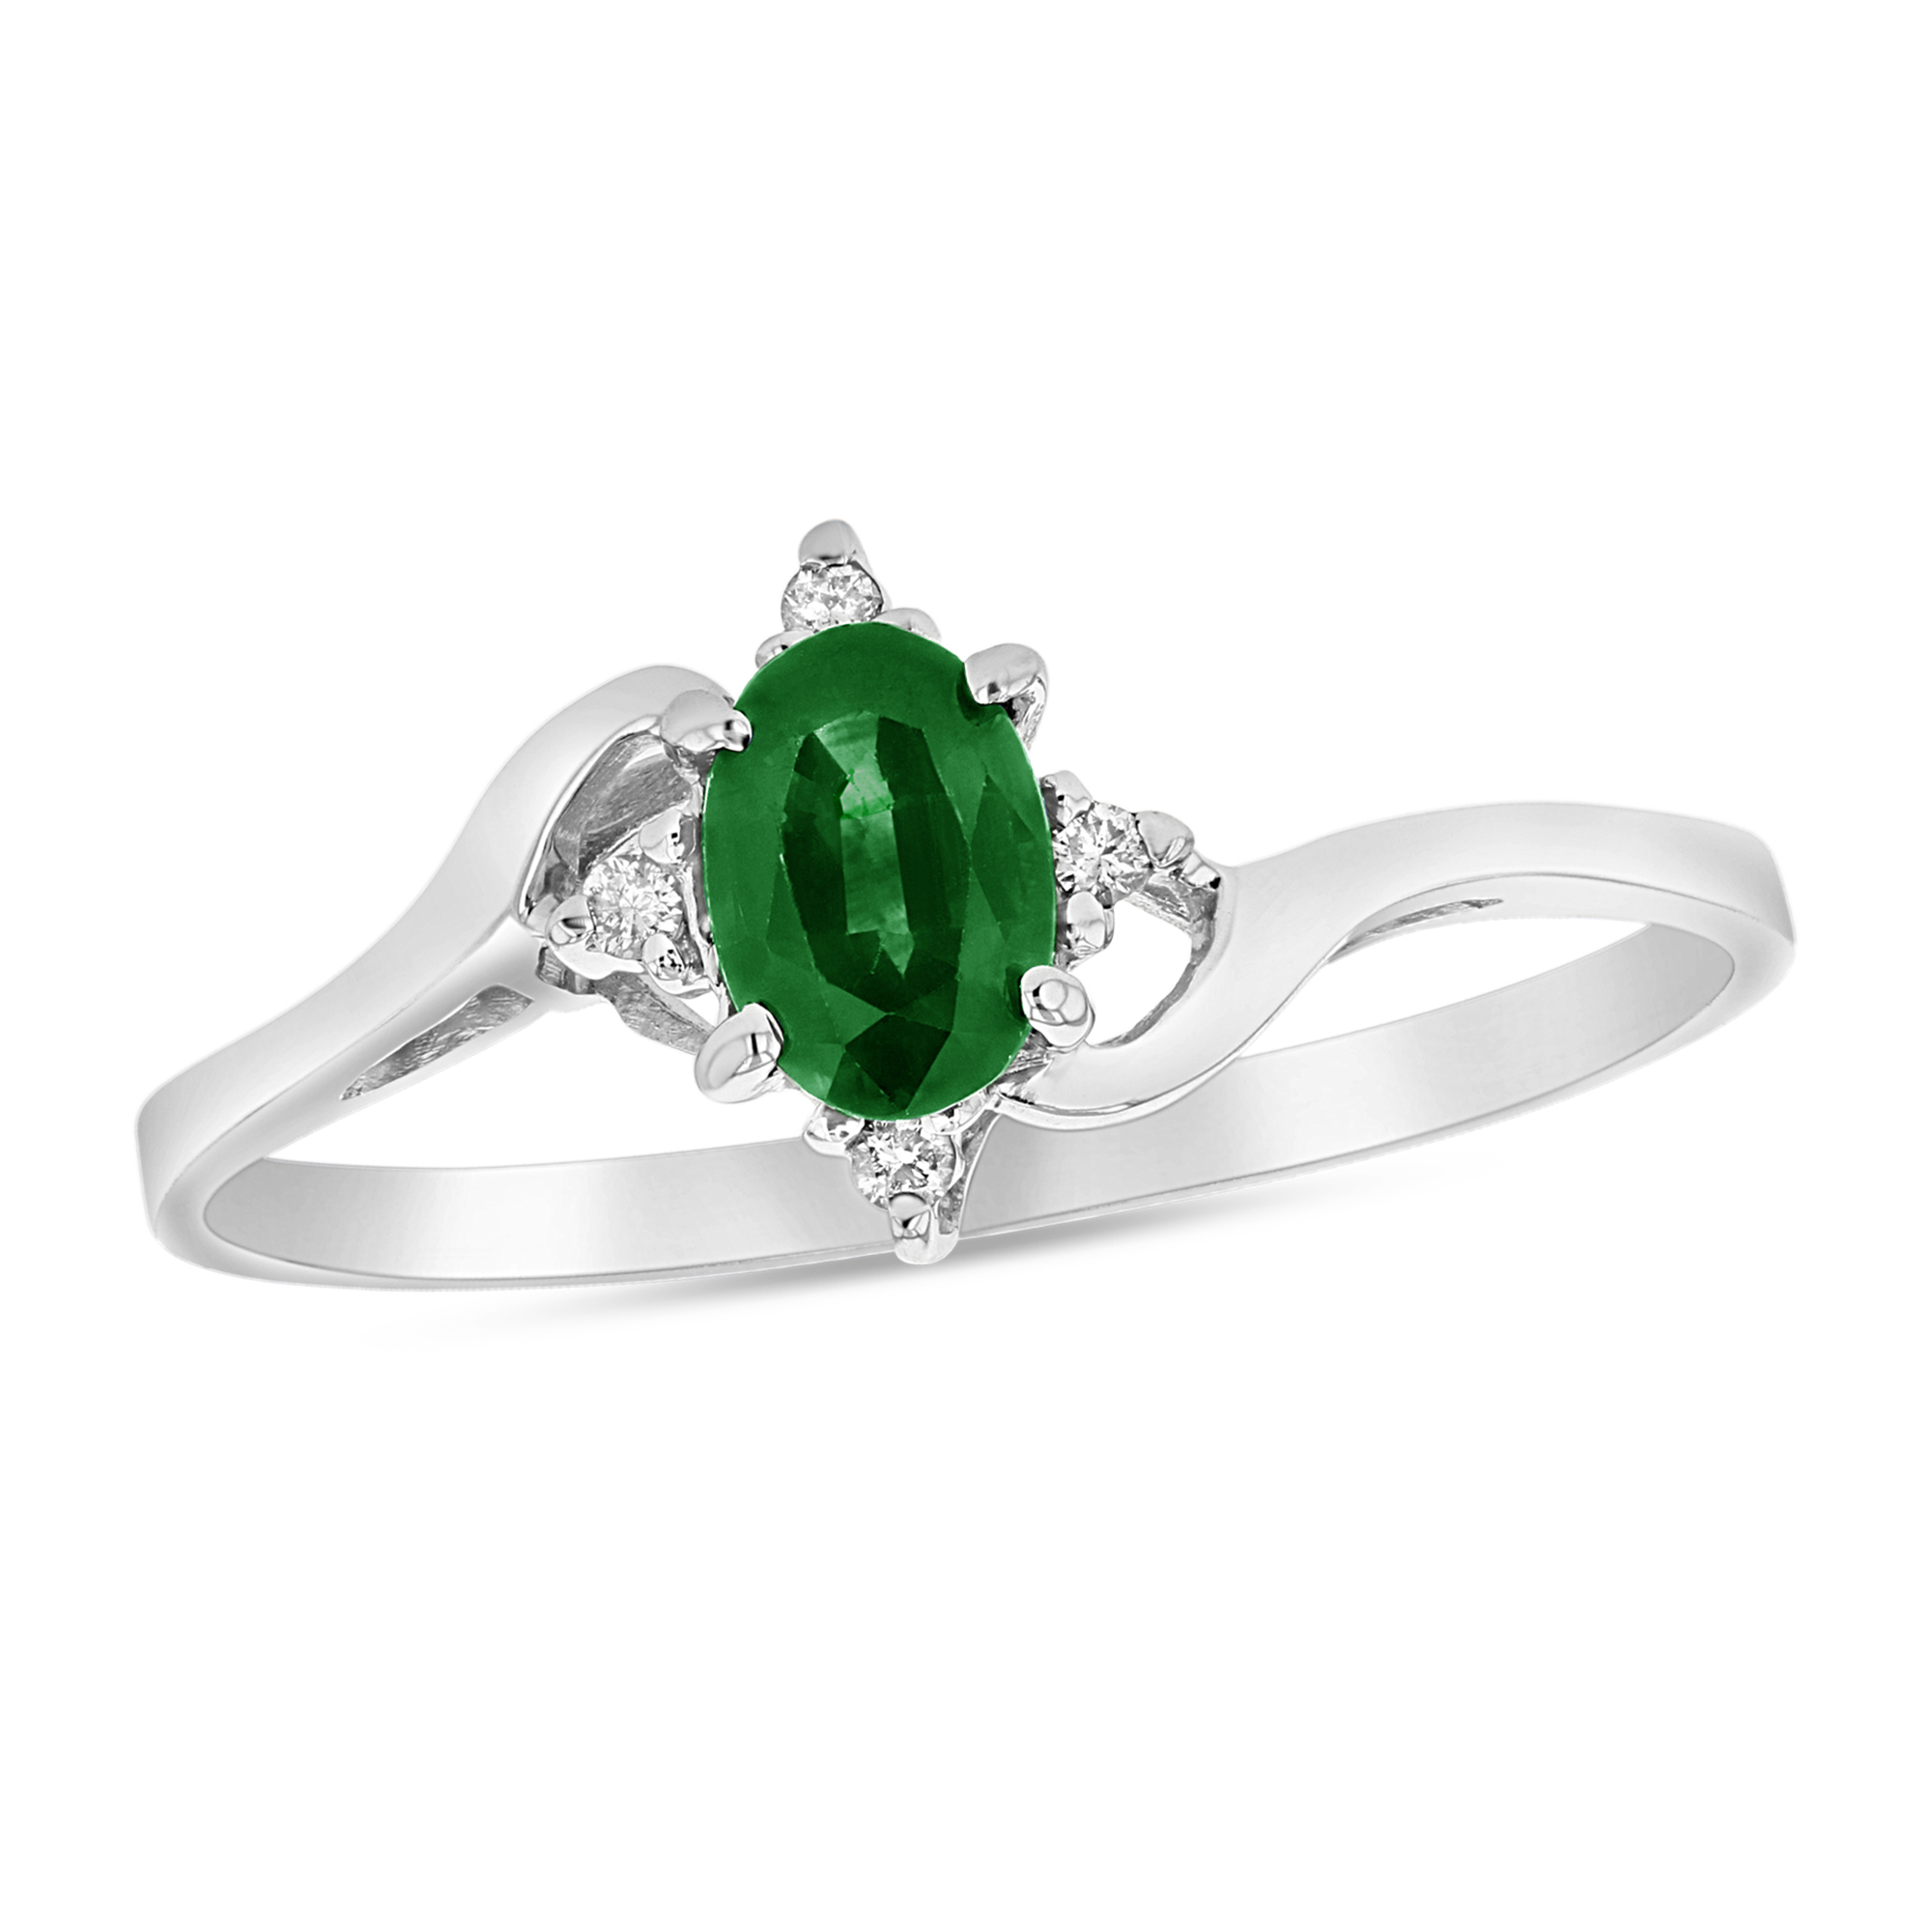 0.43ctw Oval Emerald and Diamond Ring set in 14k Gold